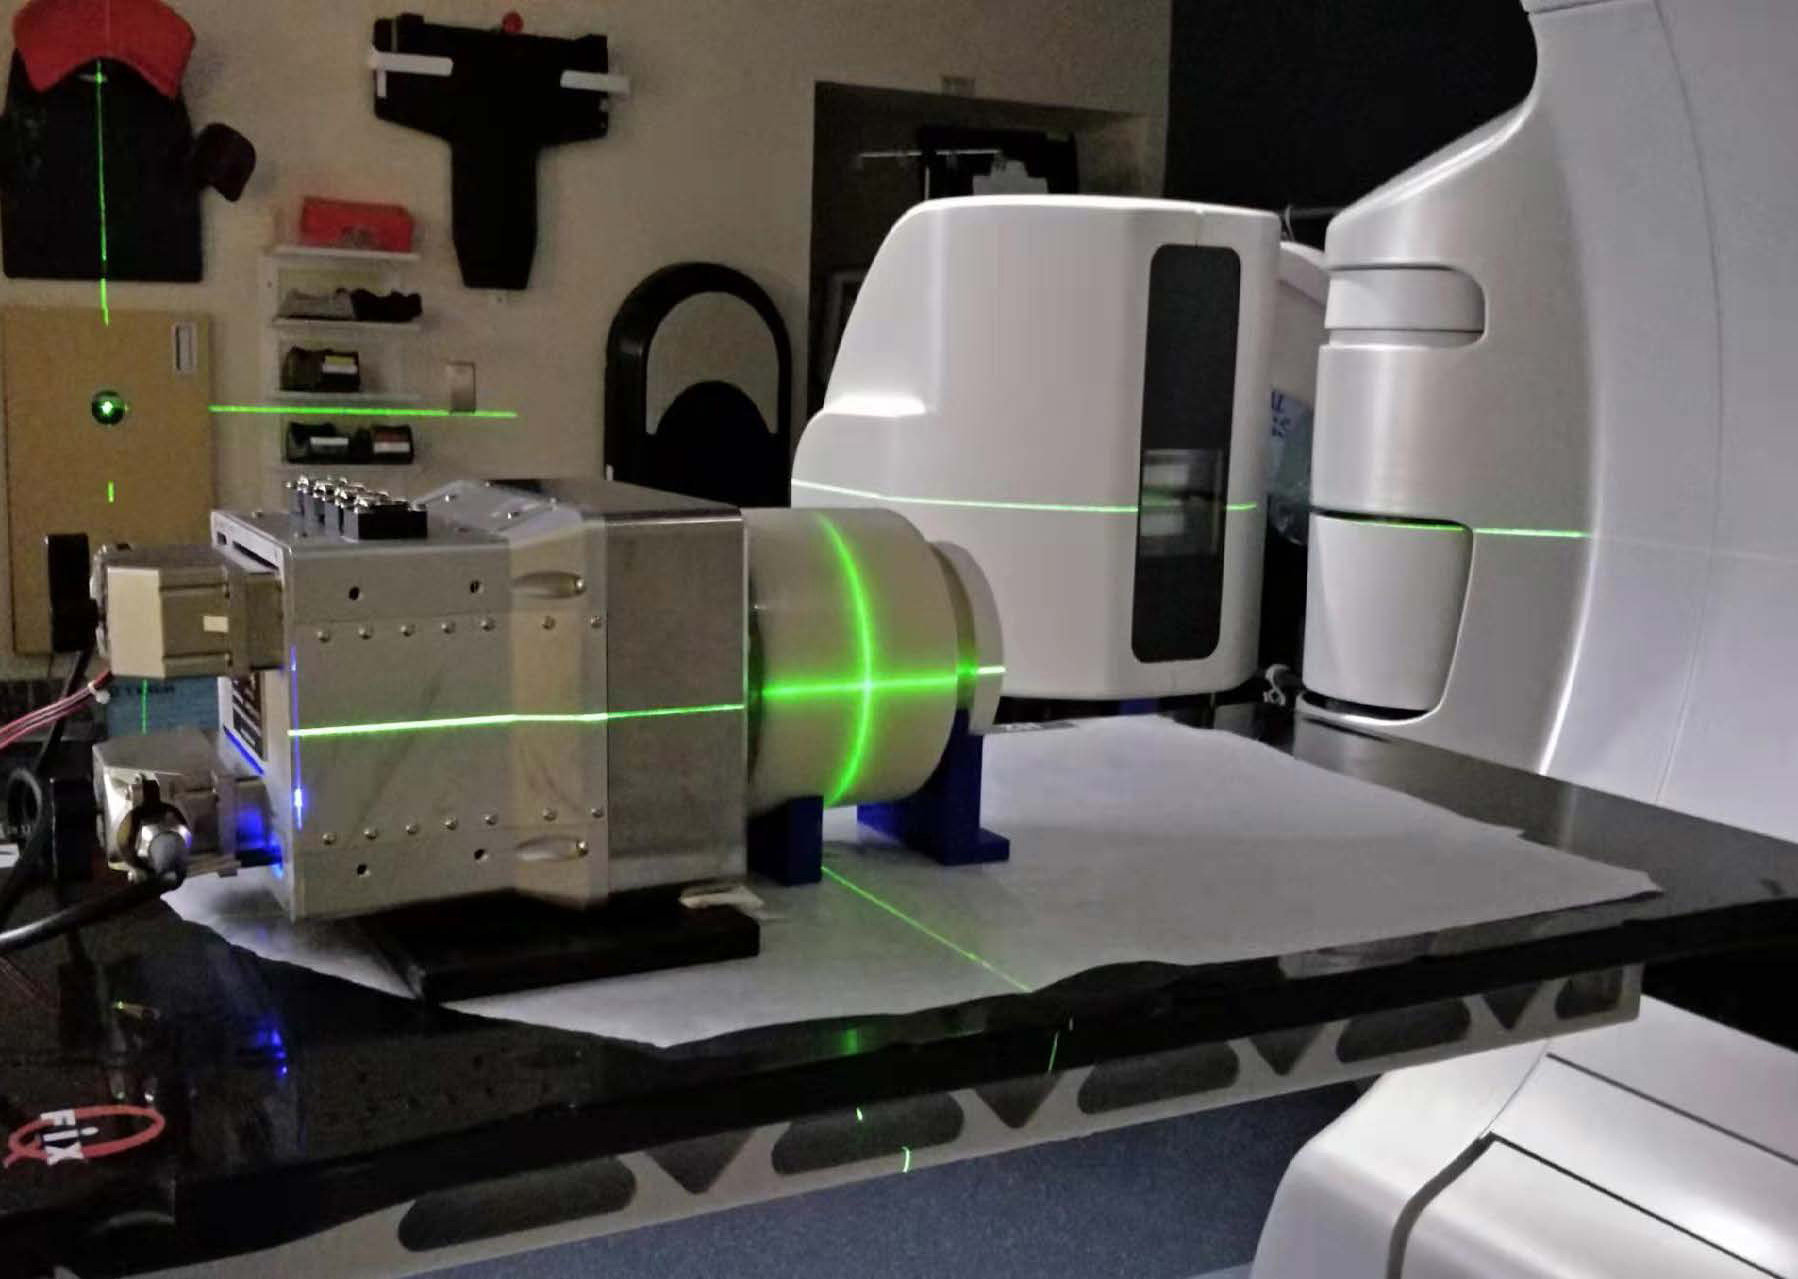 Tracking radiation treatment in real time promises safer, more effective  cancer therapy - Michigan Engineering News